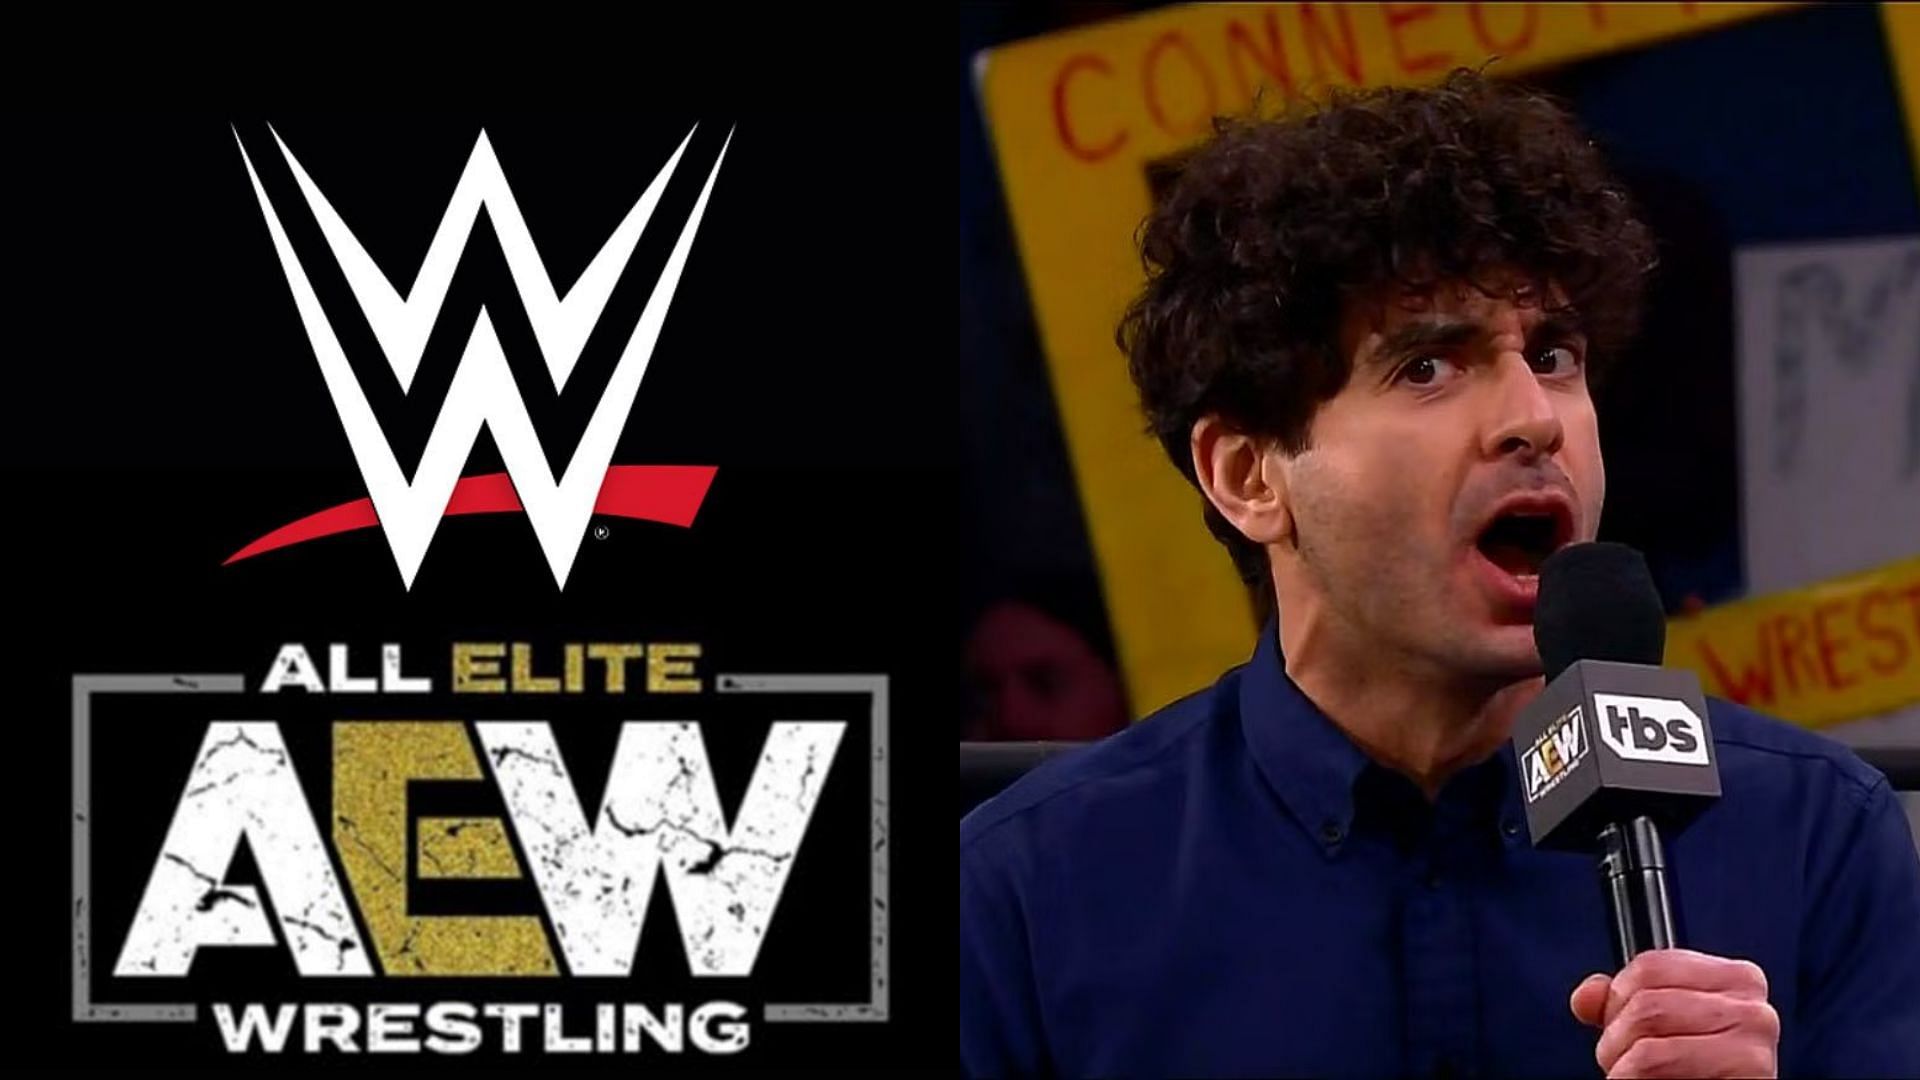 A member of the AEW roster is currently under heavy fire